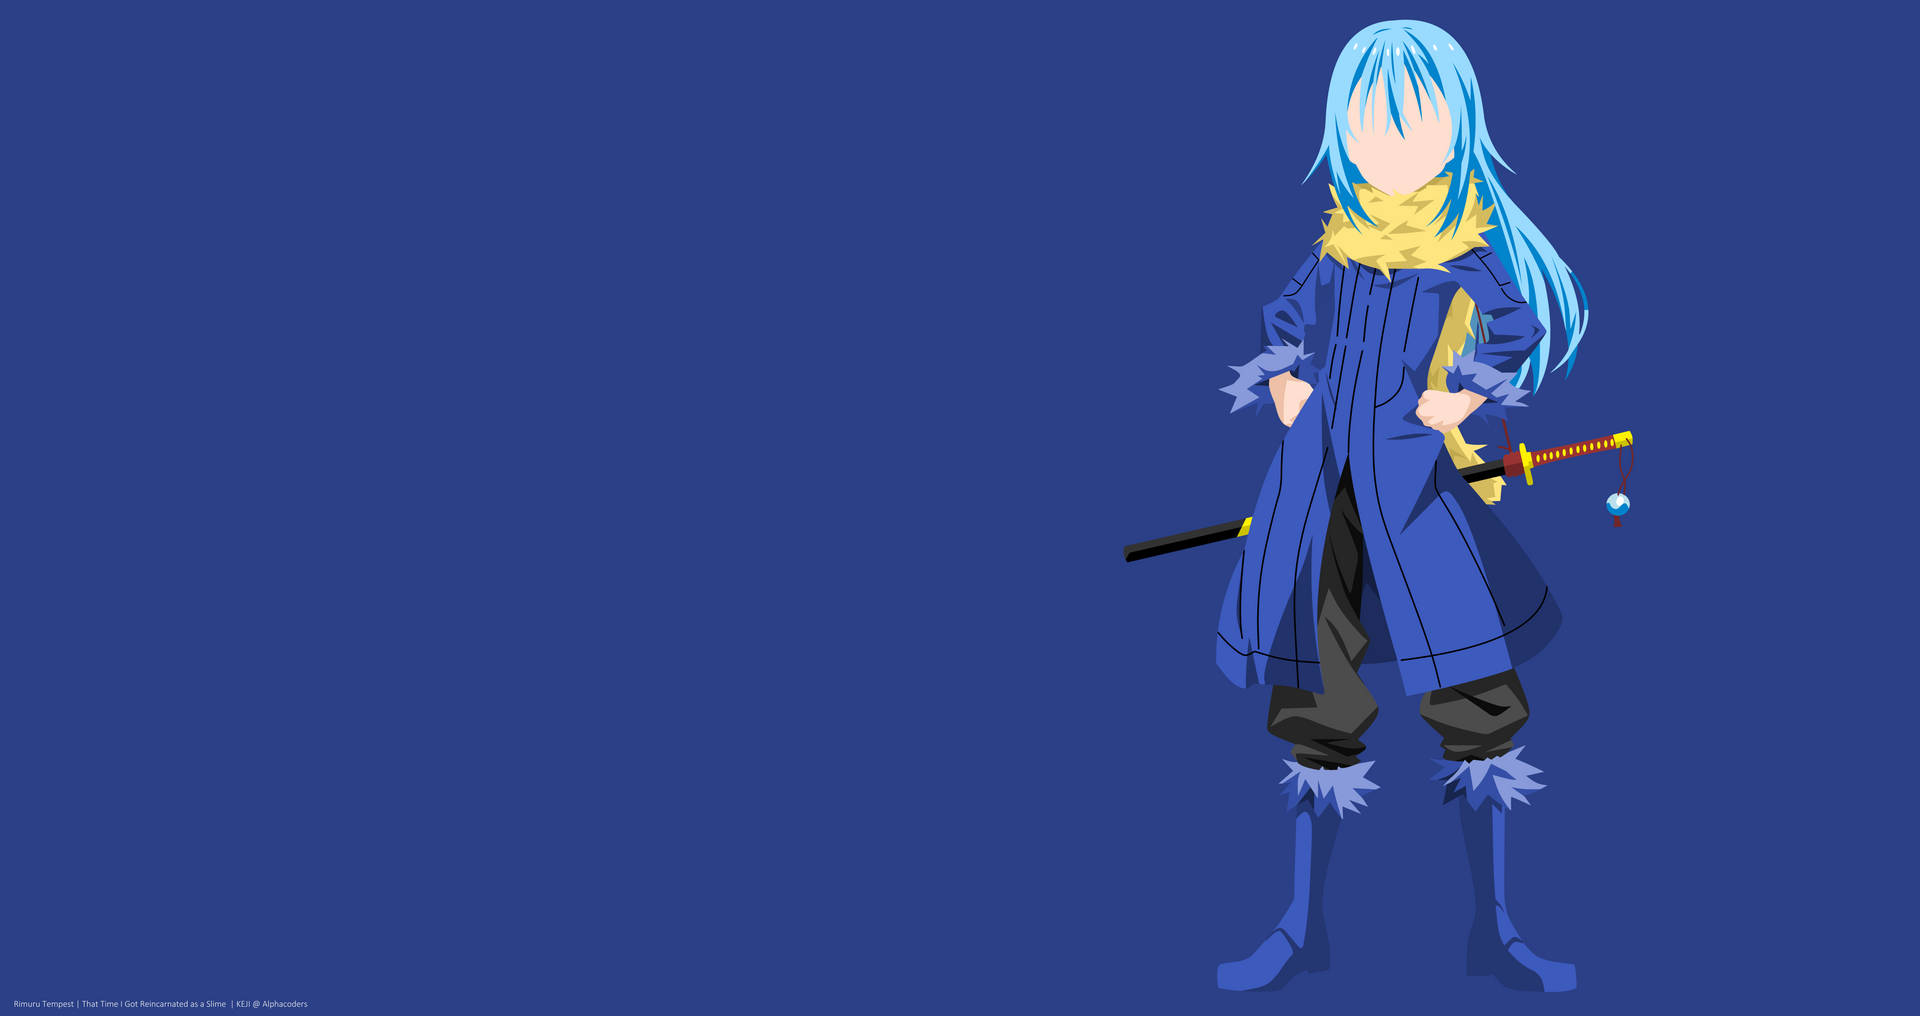 Rimuru, the protagonist of That Time I Got Reincarnated As A Slime Wallpaper